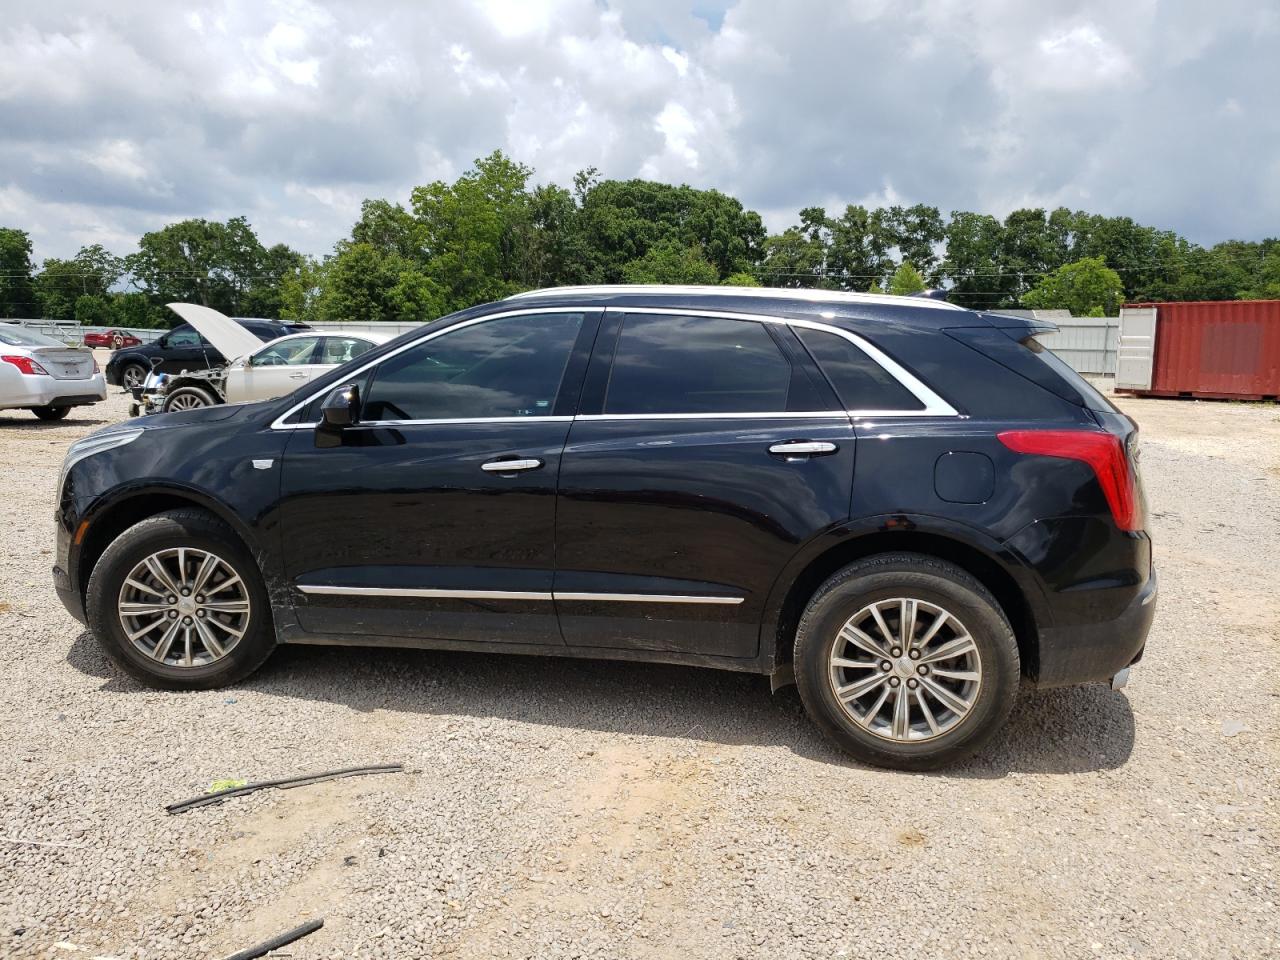 1GYKNBRS6HZ****** Used and Repairable 2017 Cadillac XT5 in AL - Theodore